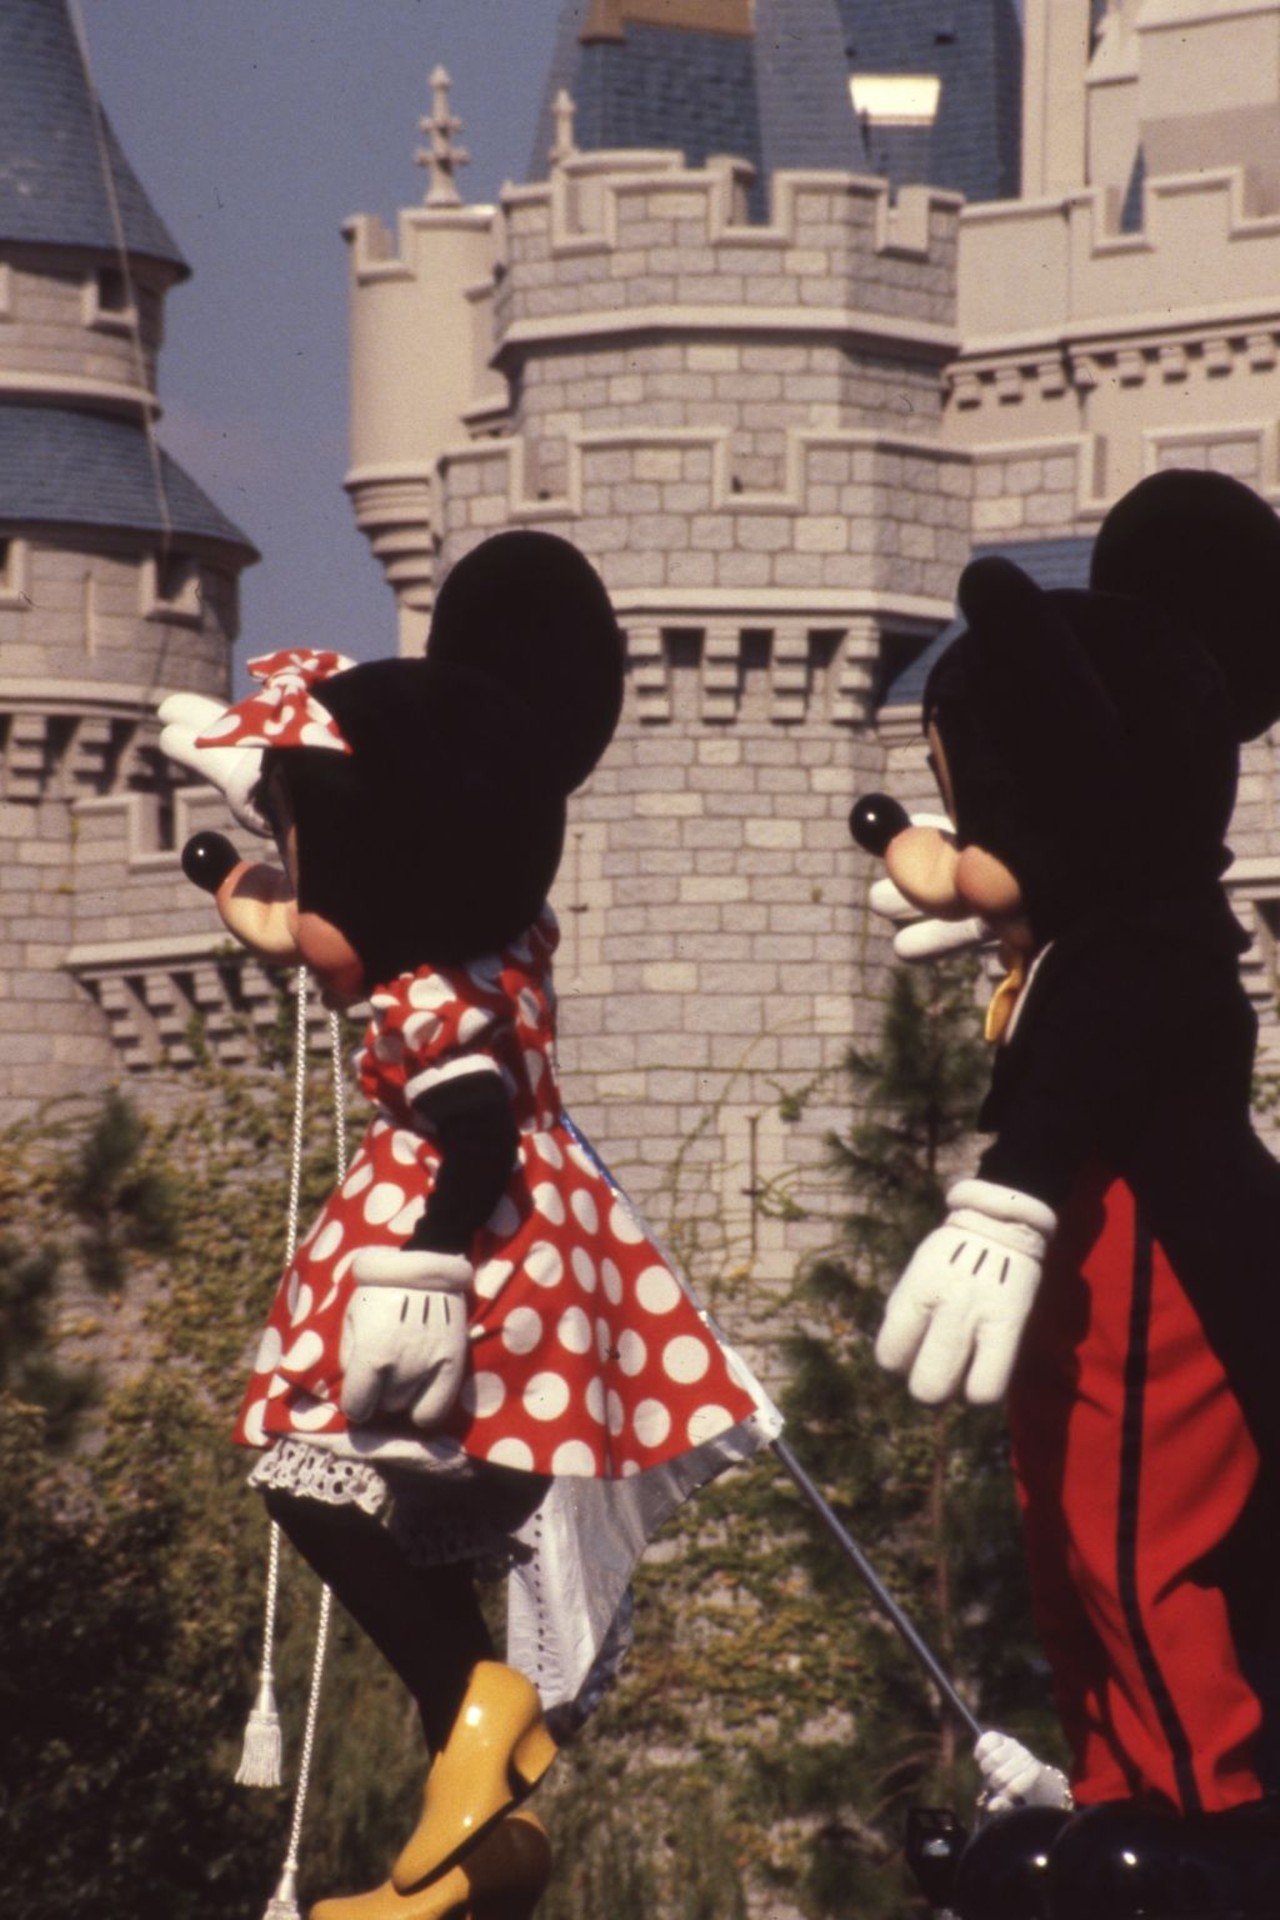 Mickey and Minnie Mouse in front of the castle - Walt Disney World, Florida, 1981